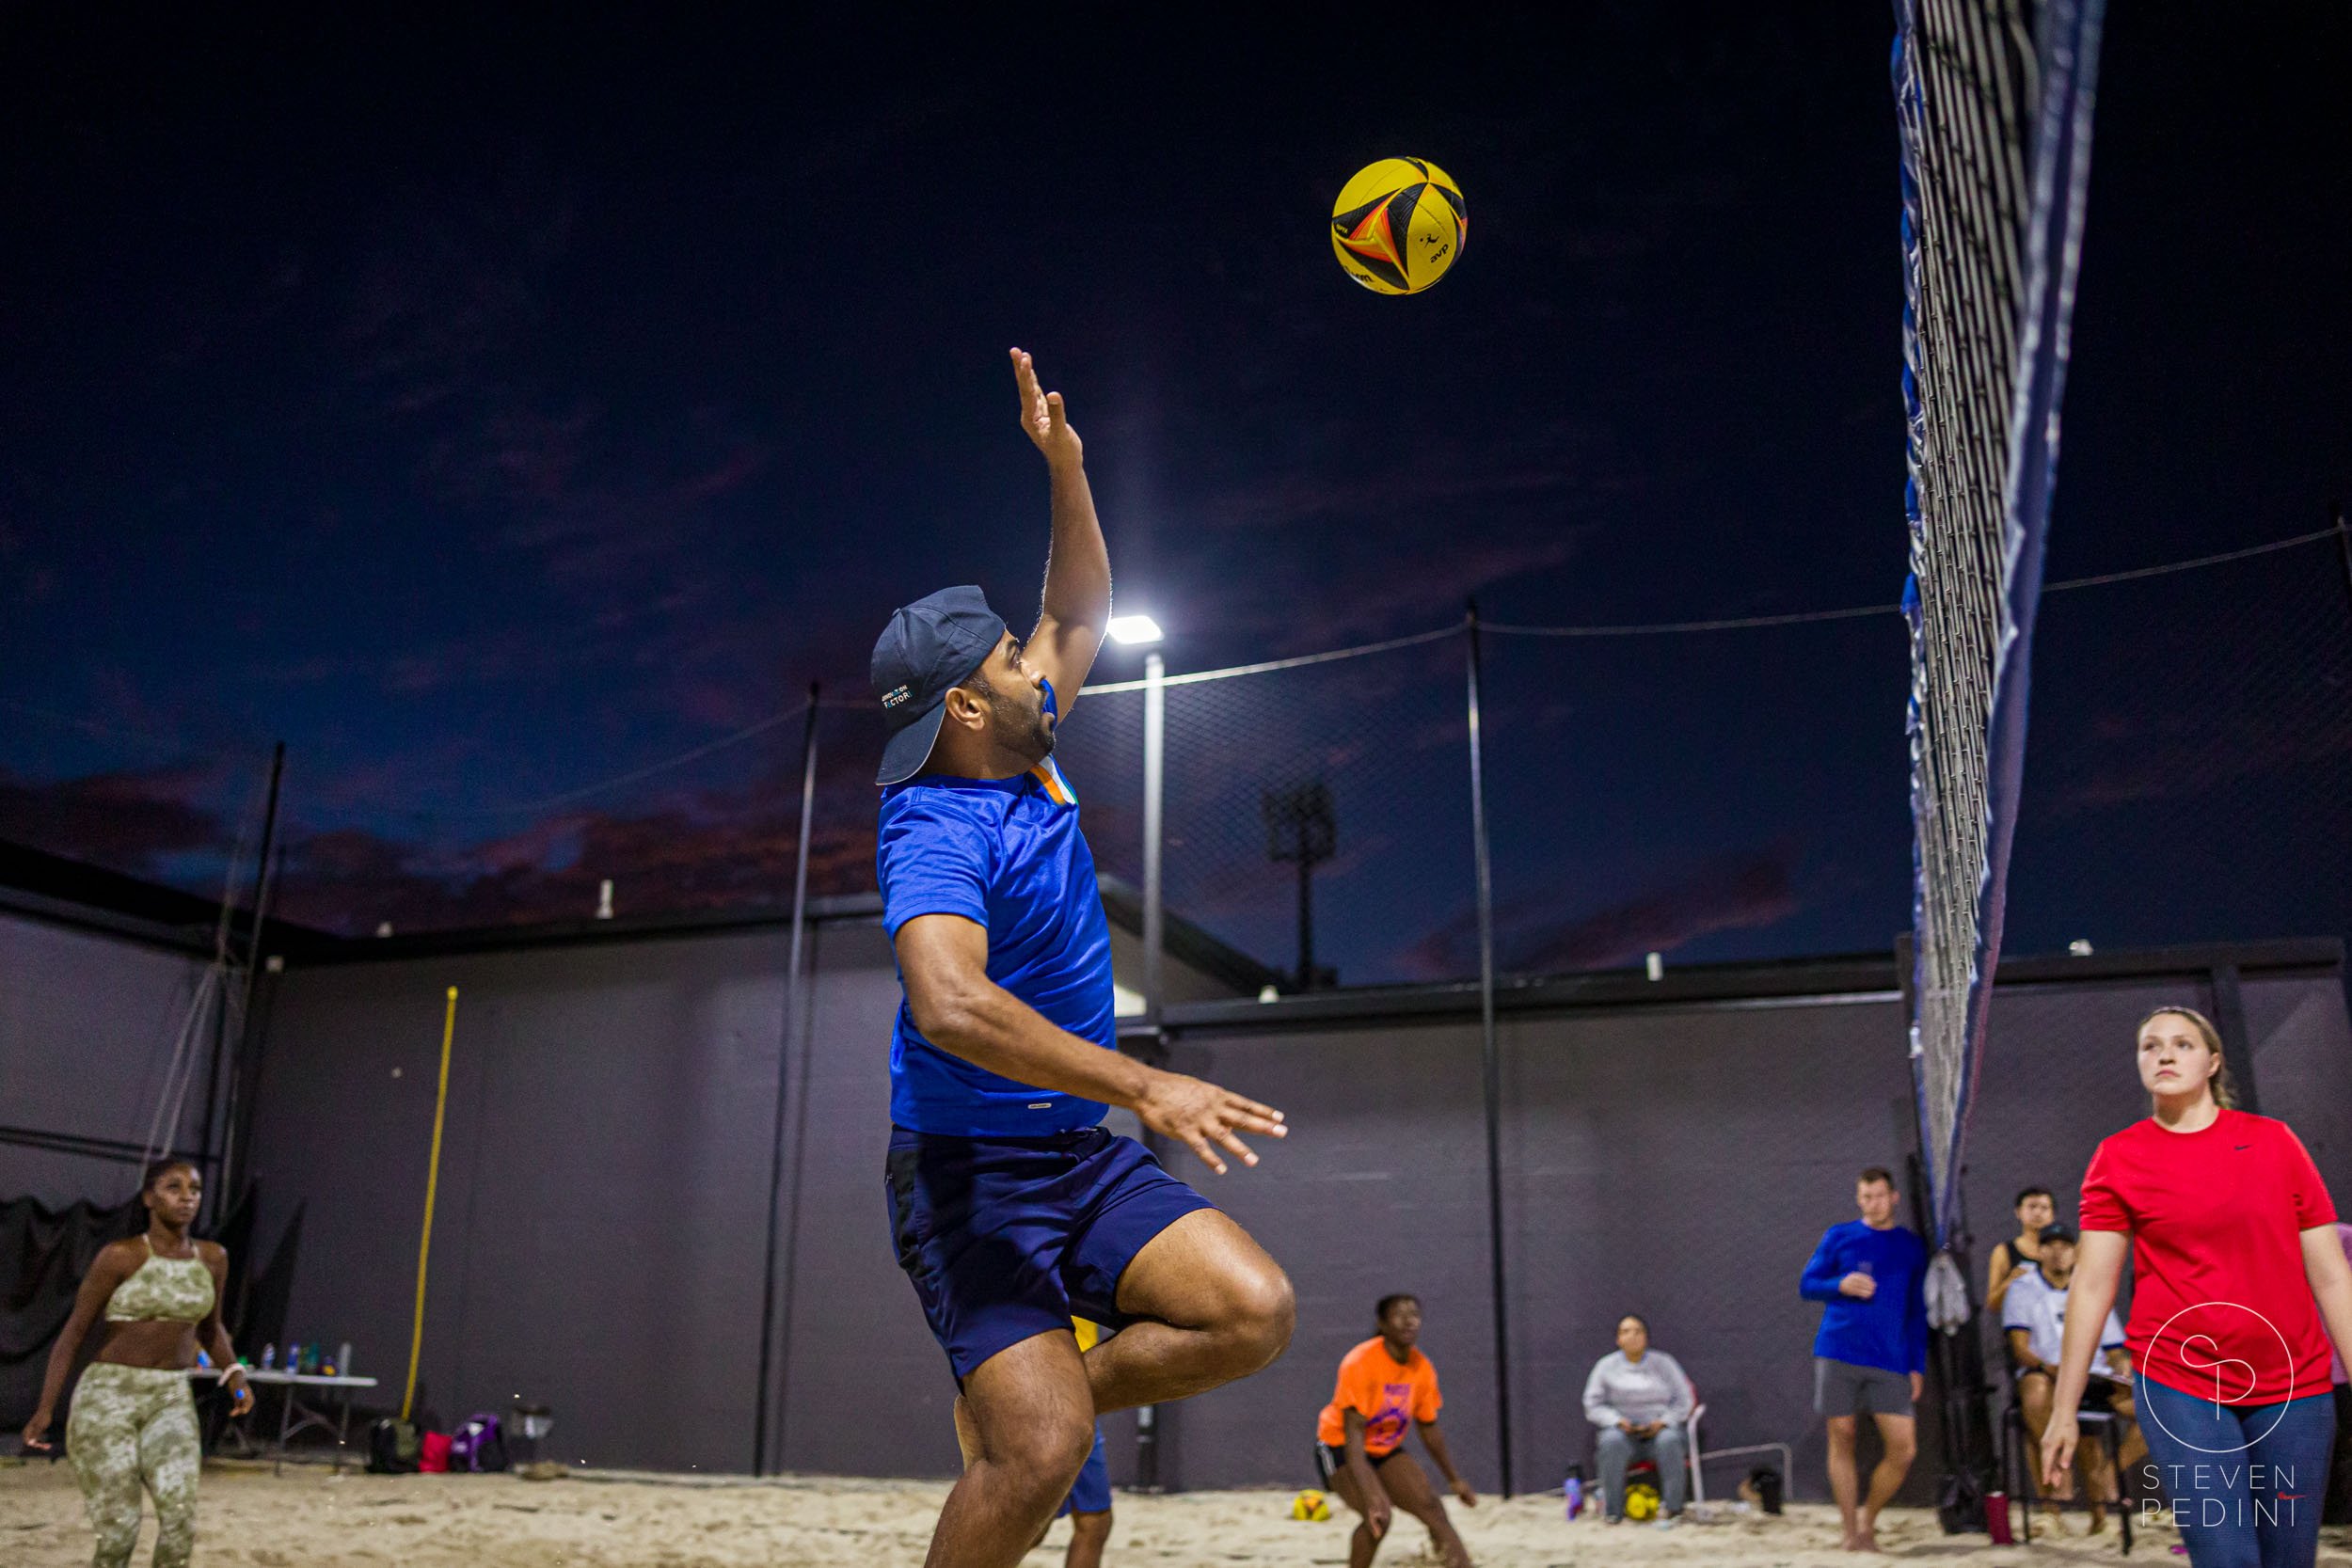 Steven Pedini Photography - Bumpy Pickle - Sand Volleyball - Houston TX - World Cup of Volleyball - 00367.jpg